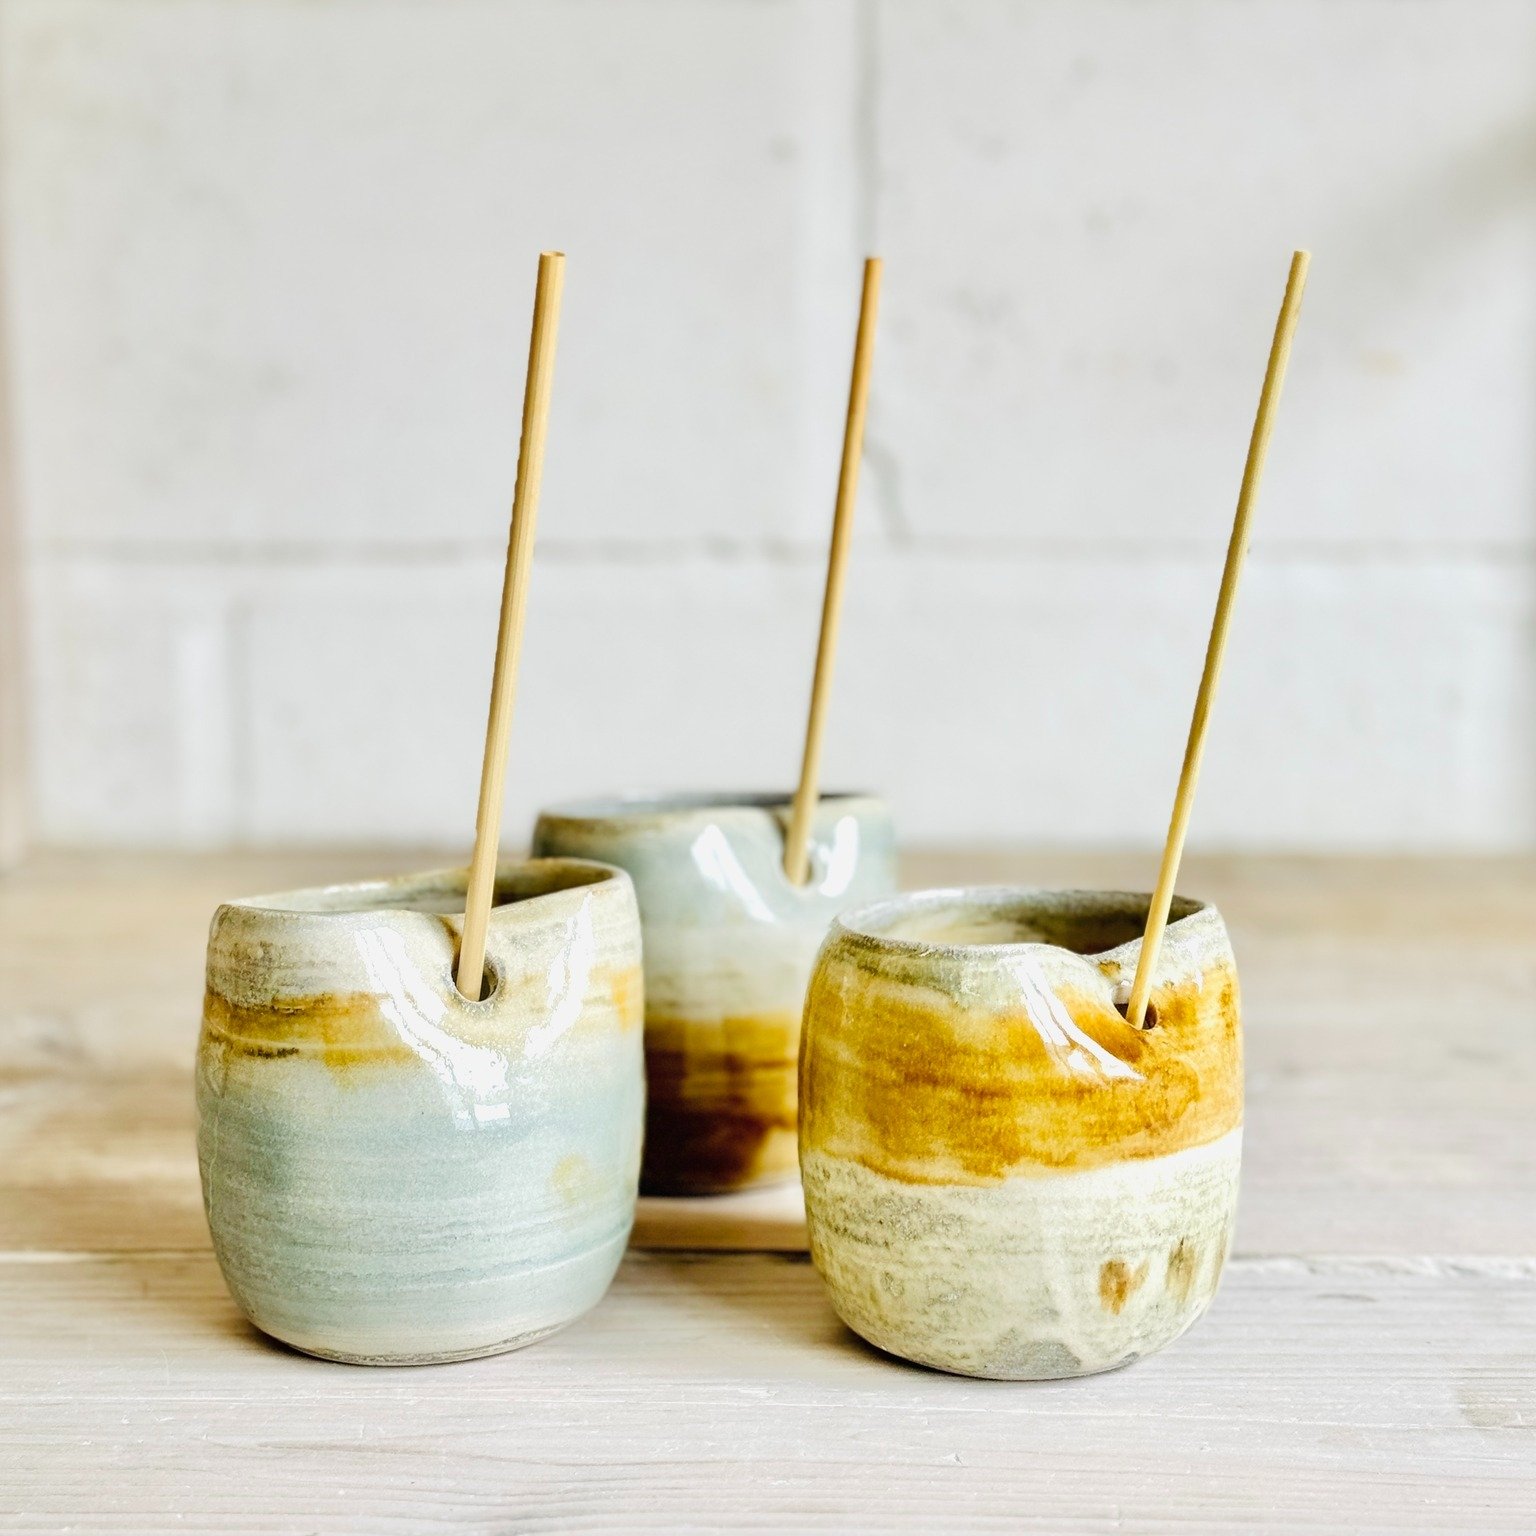 Introducing Clare's unique set of cups, each designed with a handy hole for the straw. A clever and quirky take on drinkware!

#ceramiccups #kitchenceramics #makeyourownceramics #stoneware #domesticpottery #usefulpottery #pottery_lovers #potterylife 